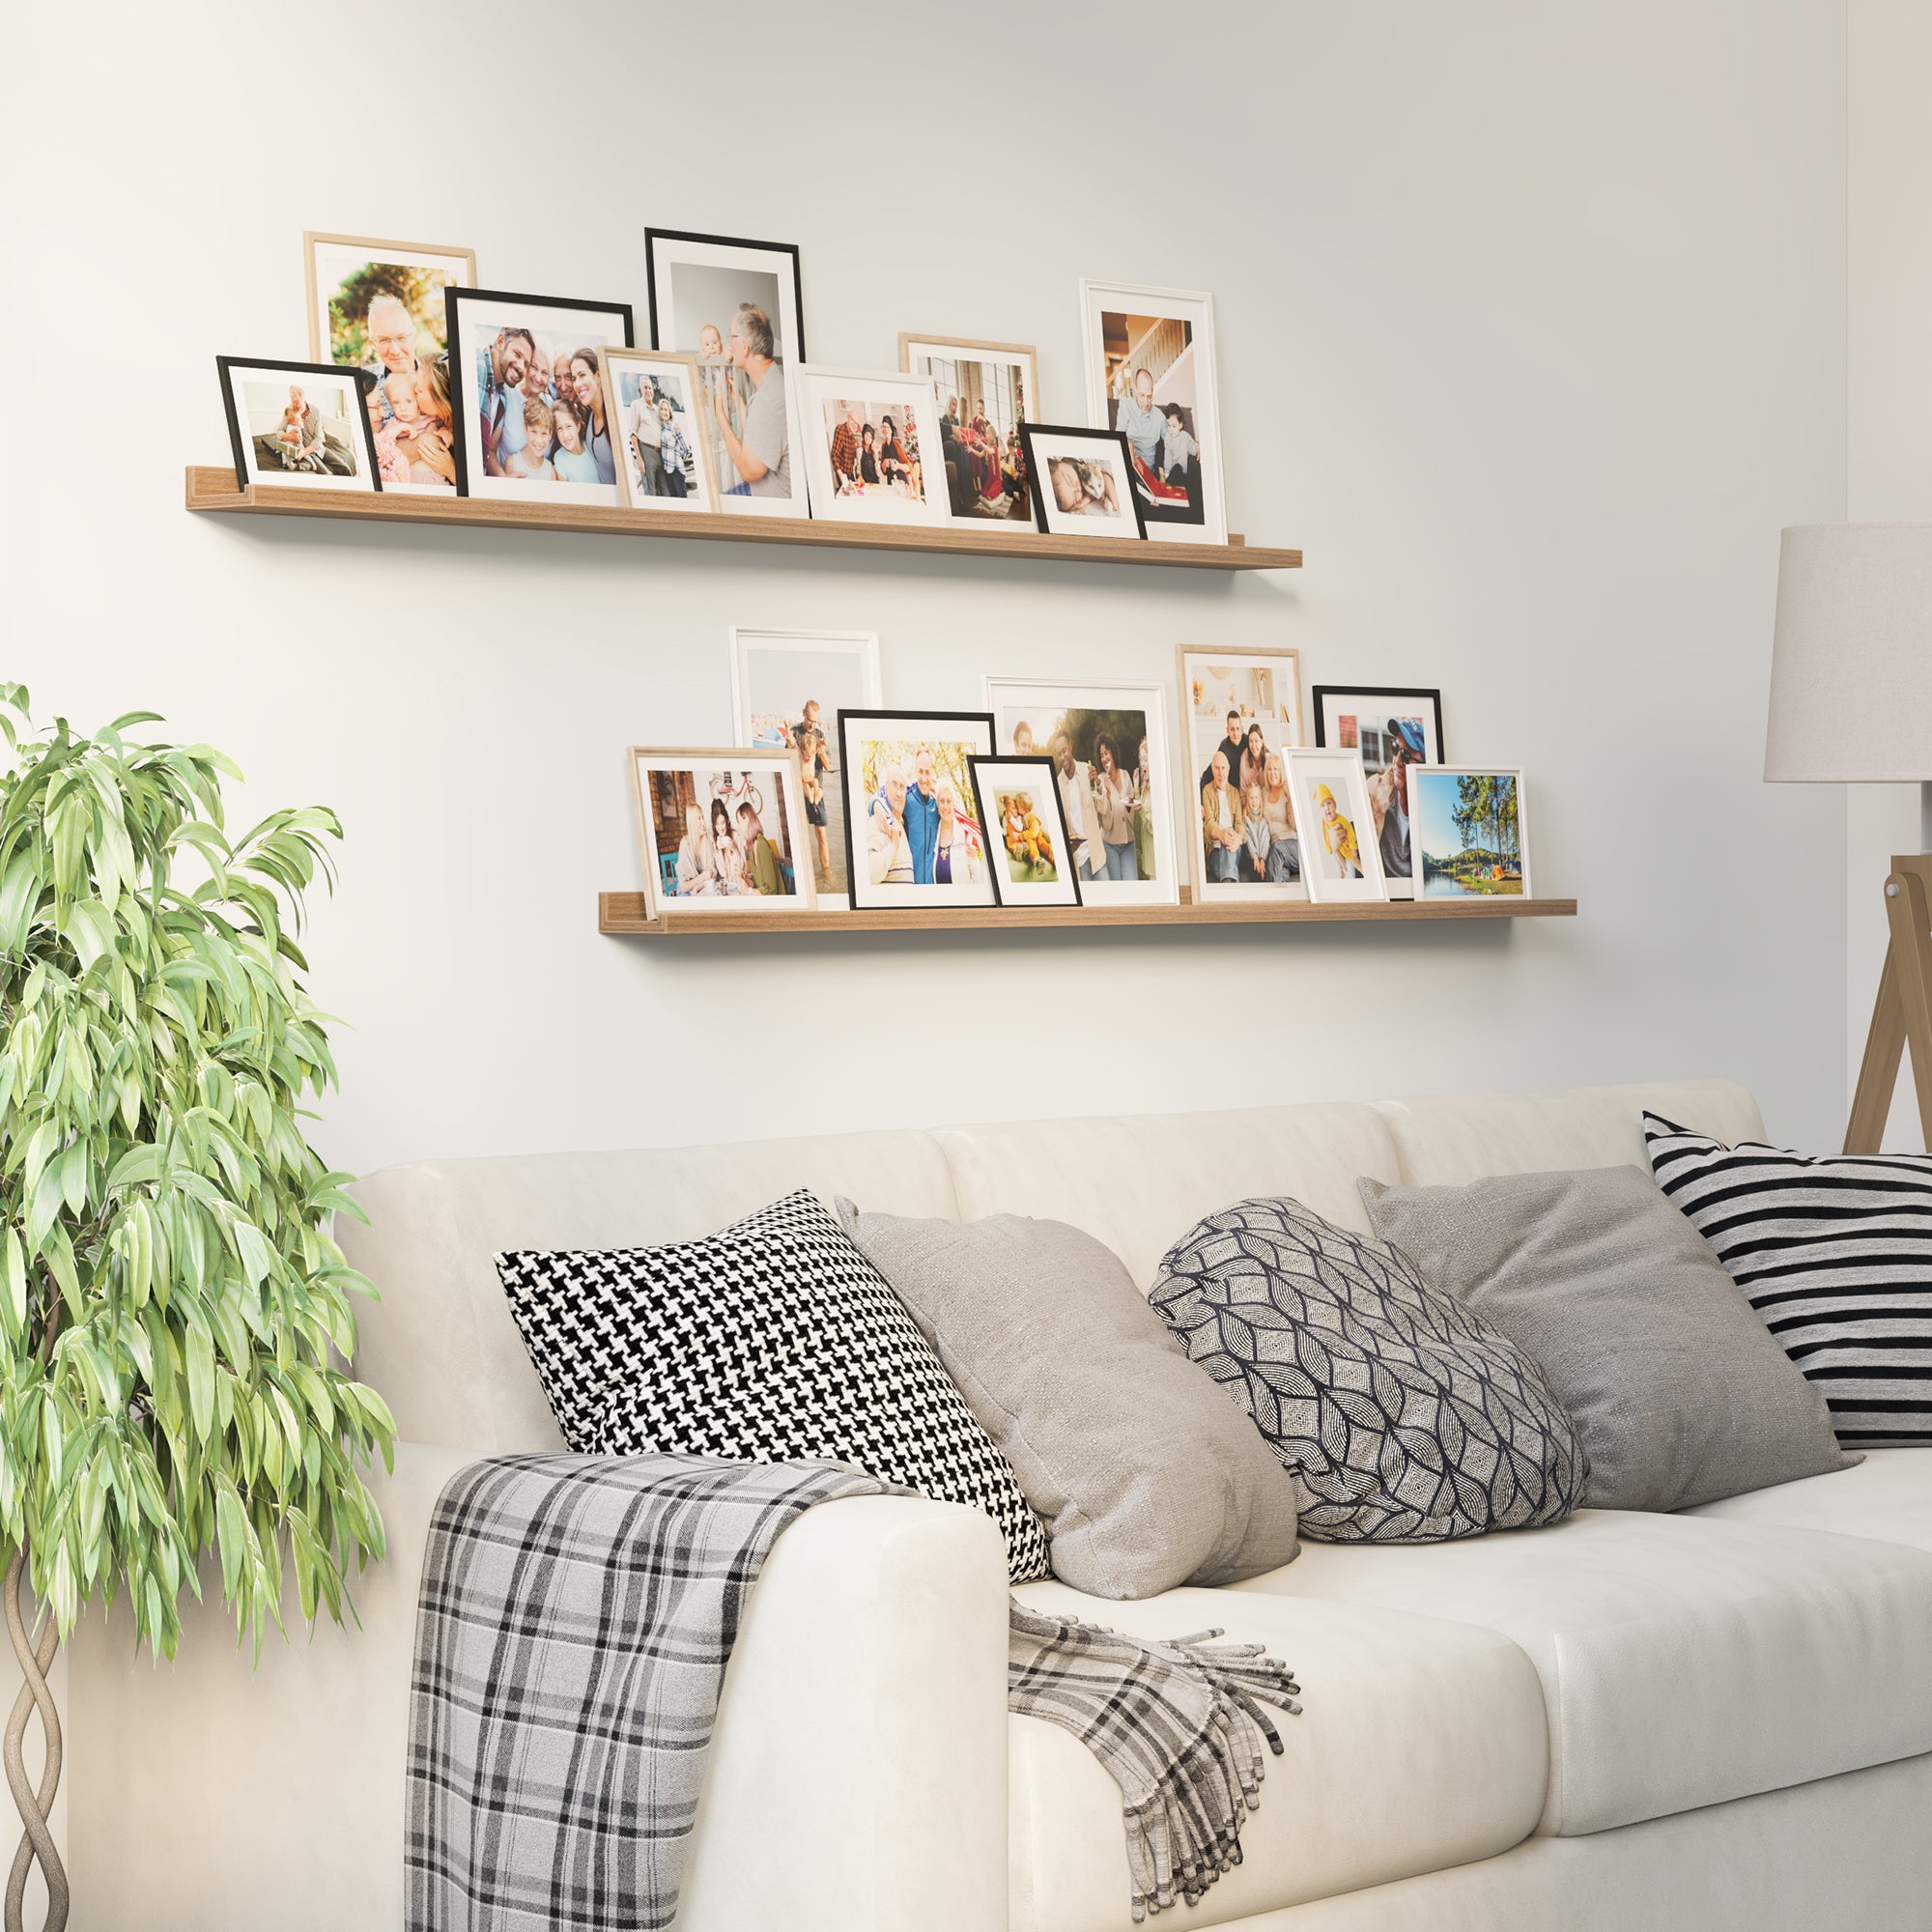 Living room with a comfortable couch and wall bookshelves above, adorned with a variety of framed family and personal photos.